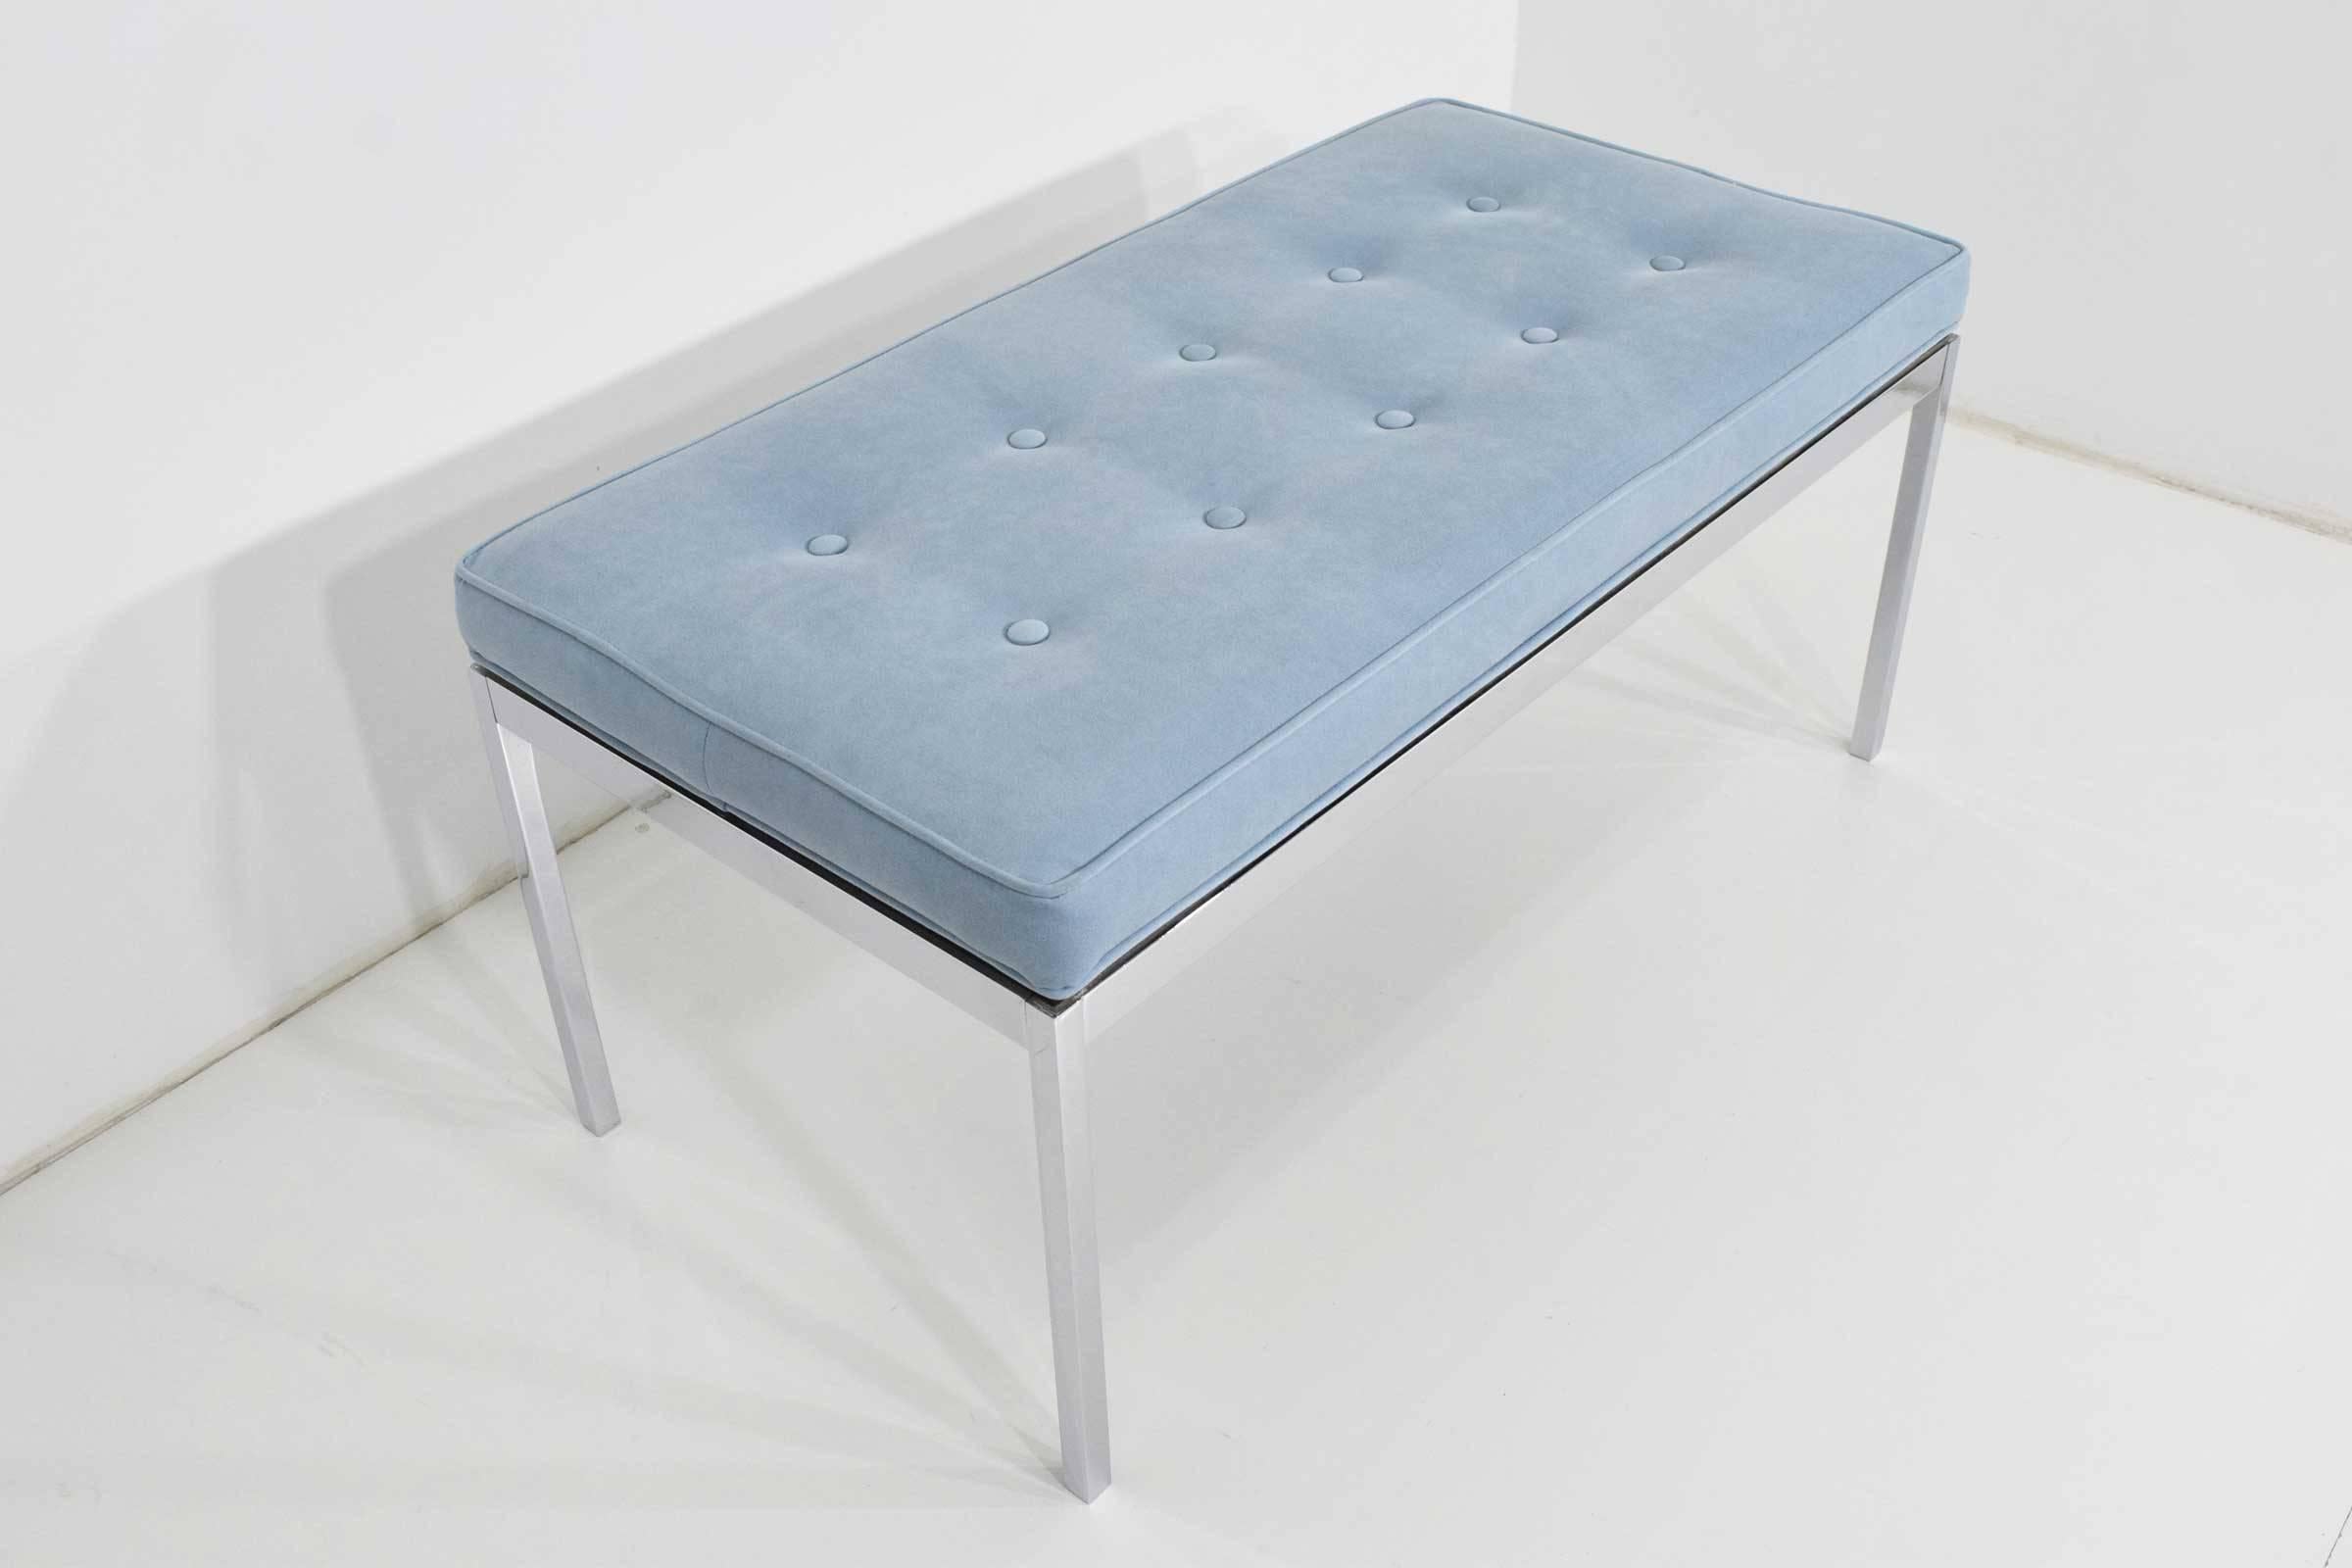 Bench is chrome with button tufted light blue microsuede cushion. We can reupholster if desired.